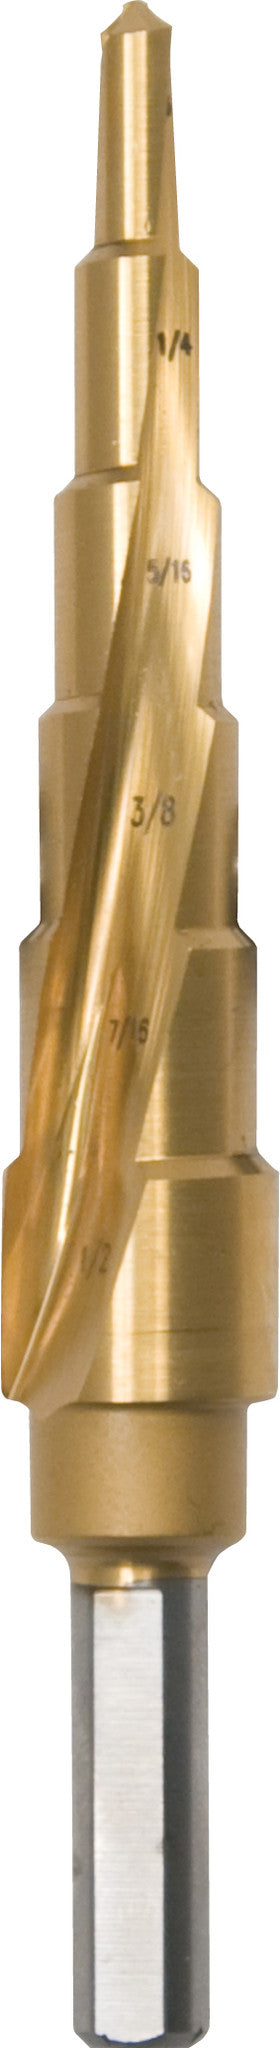 Hougen 35201 STEP DRILL 3/16 - 1/2"